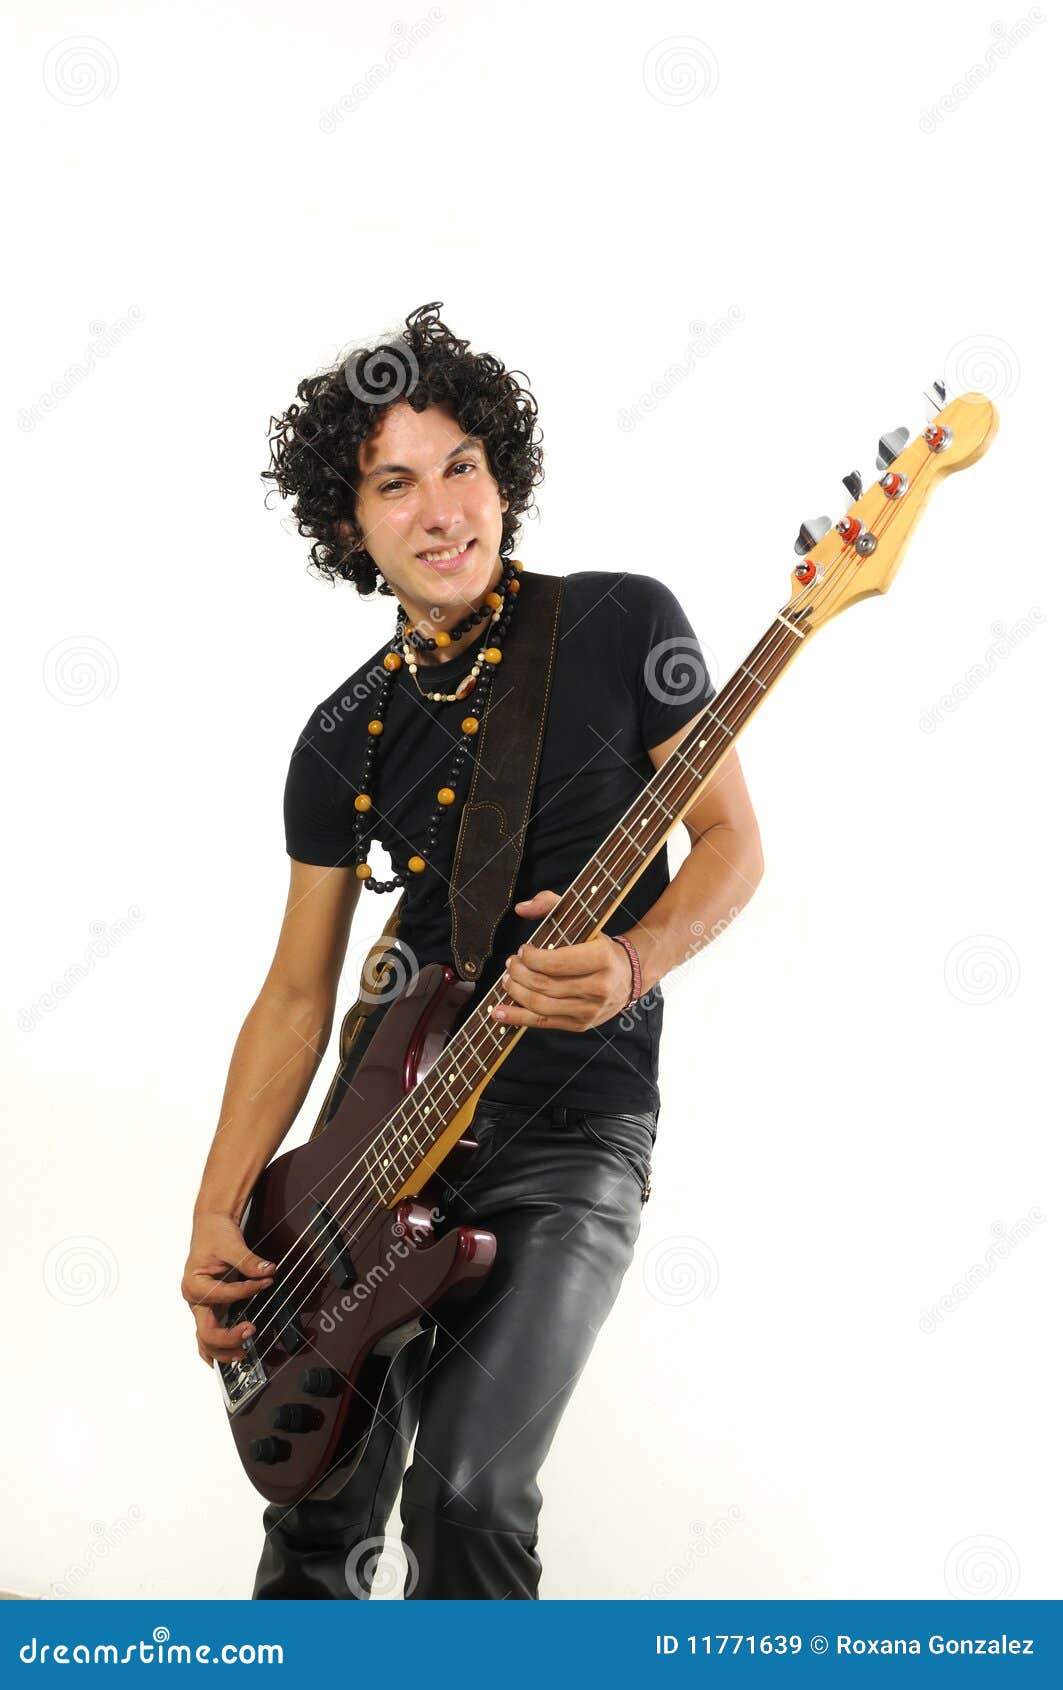 https://thumbs.dreamstime.com/z/young-guy-playing-bass-guitar-11771639.jpg